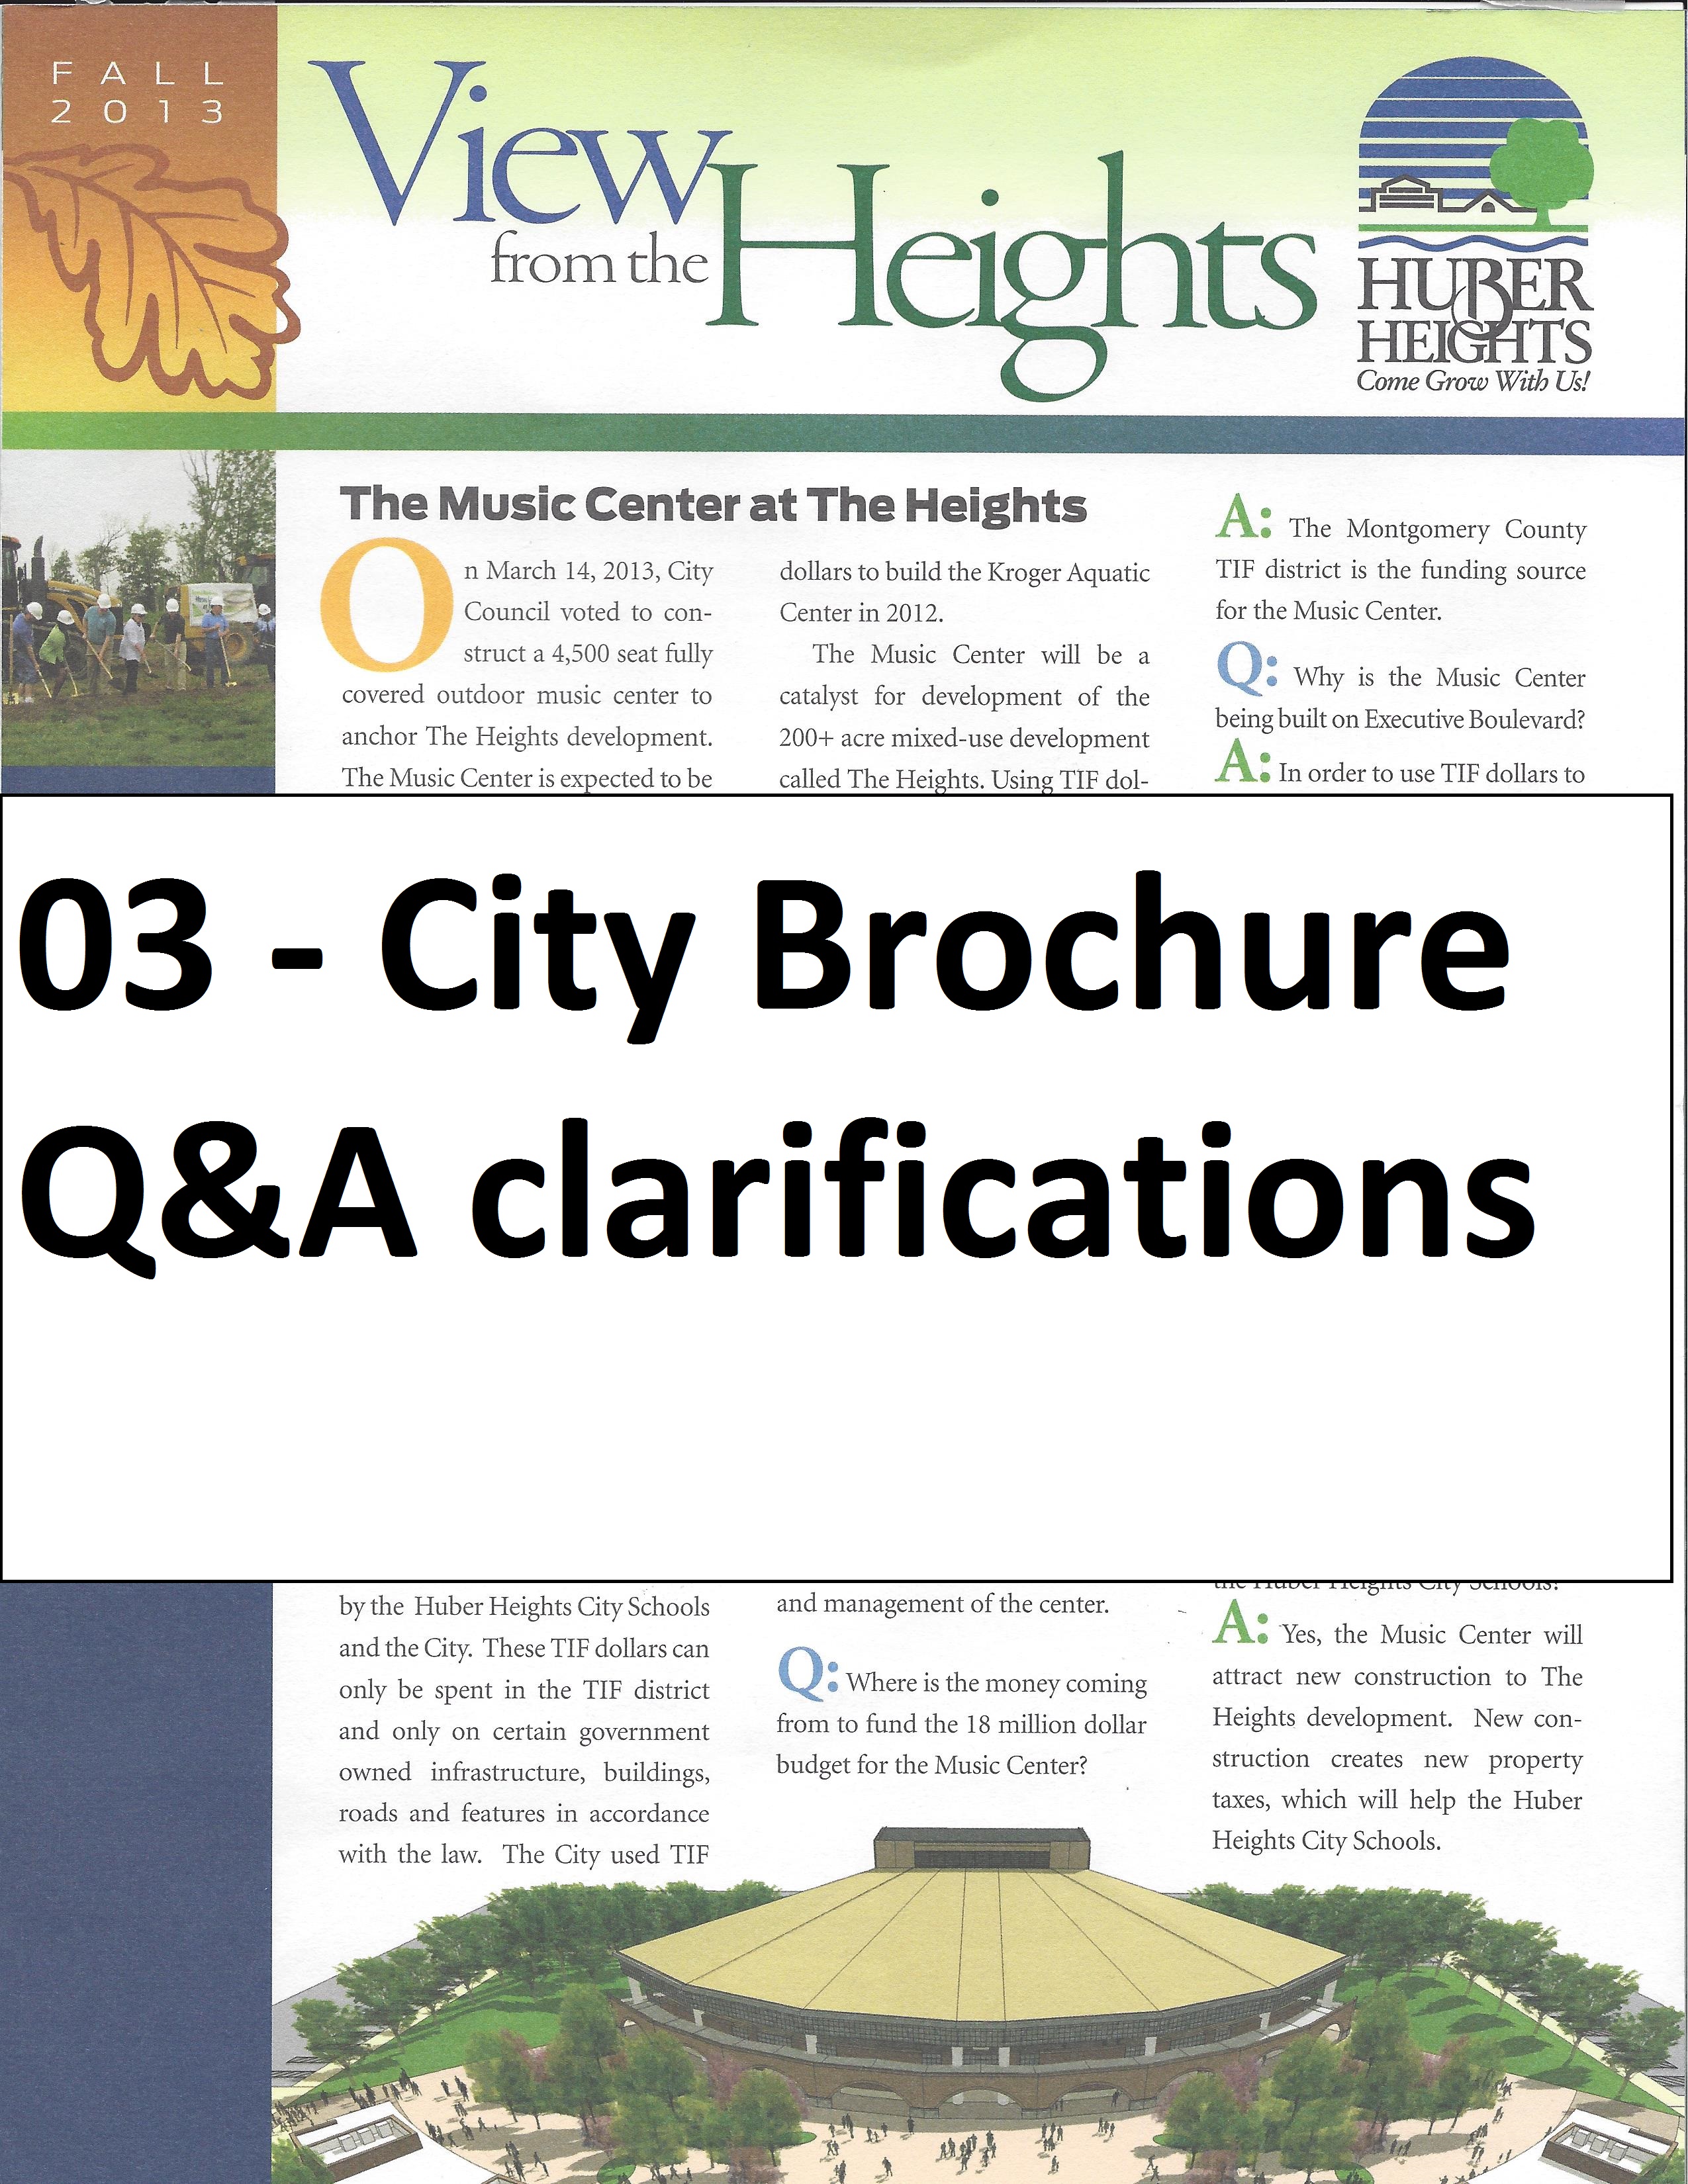 City Flier and Clarification to Q & A